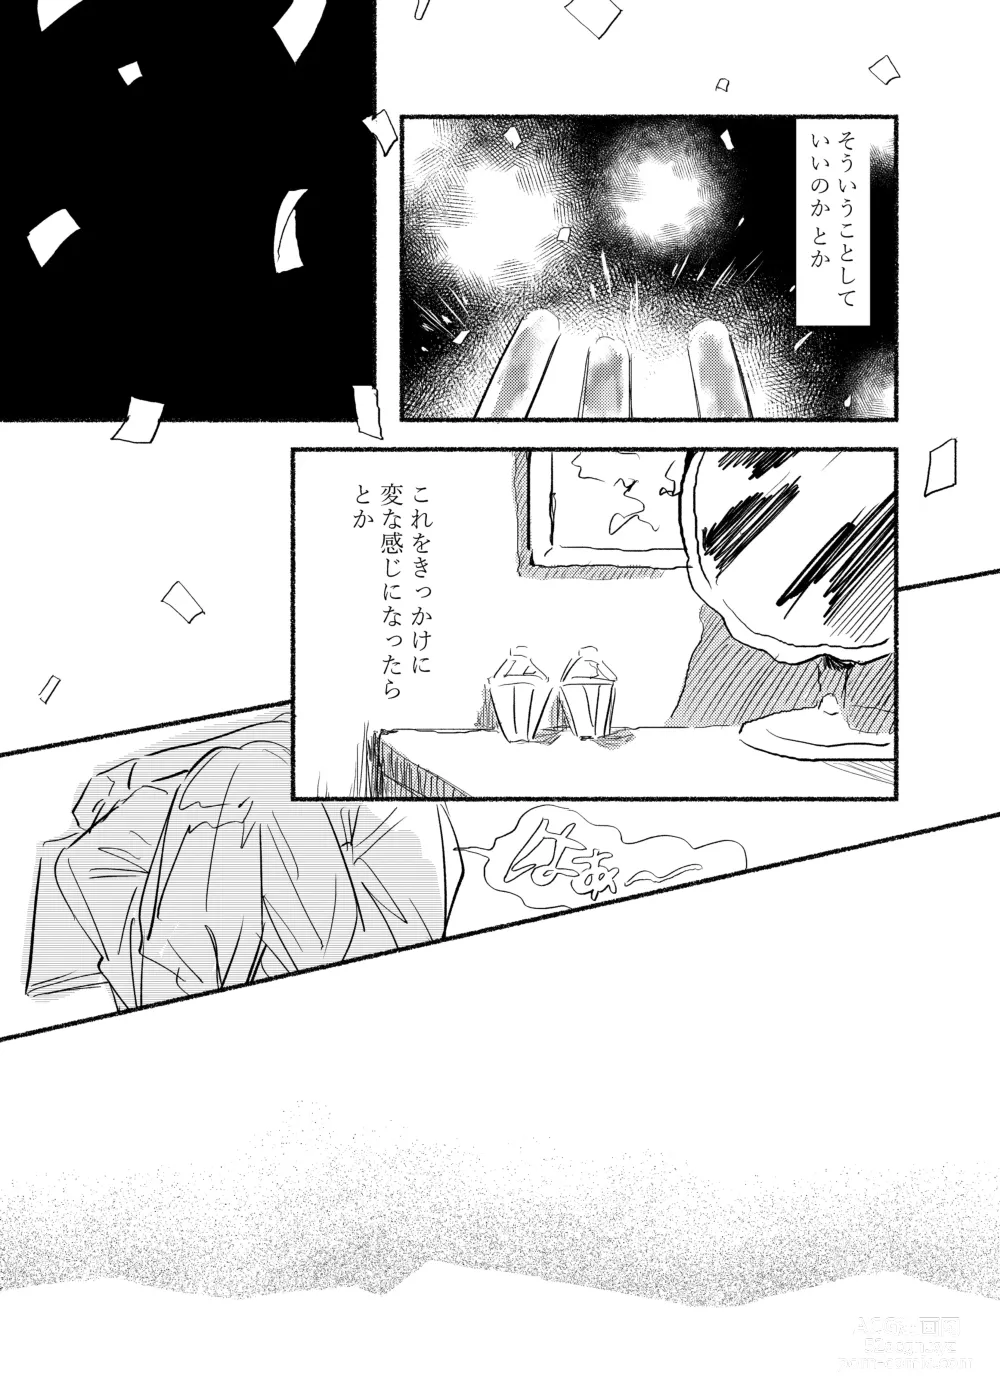 Page 14 of doujinshi IDENTITY REALIZE